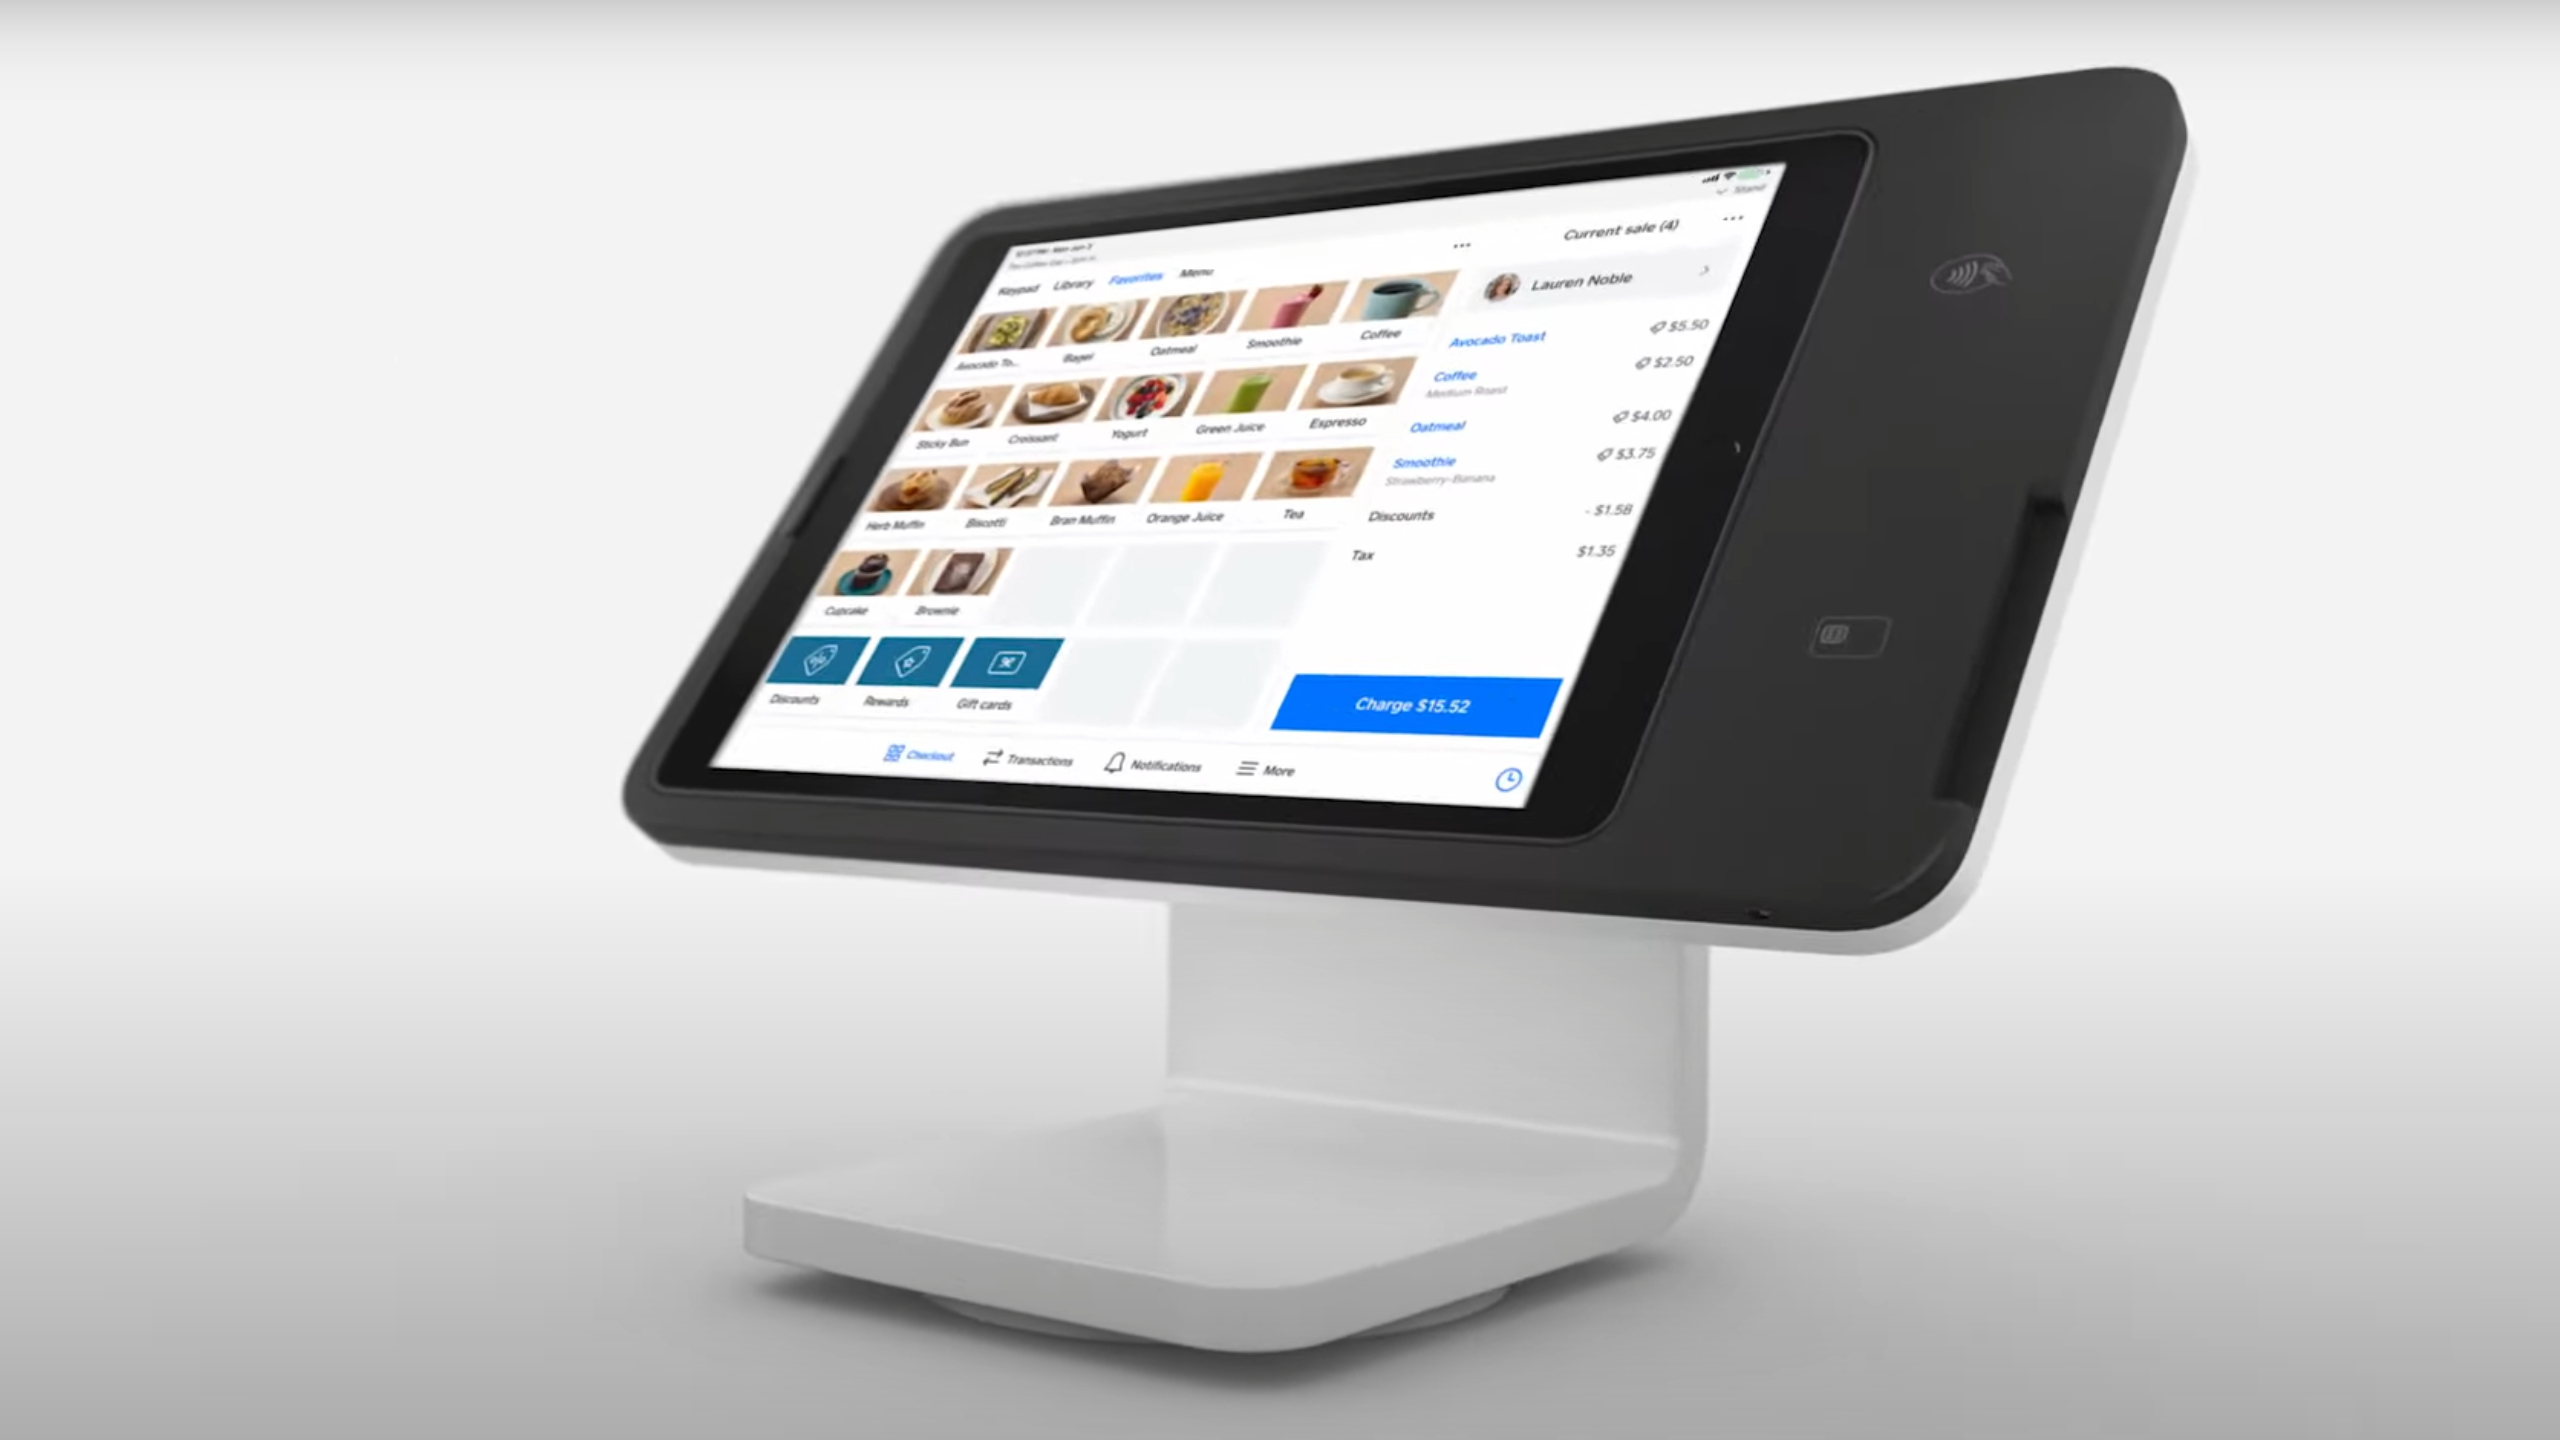 Square reveals new Square Stand iPad POS with built-in card reader